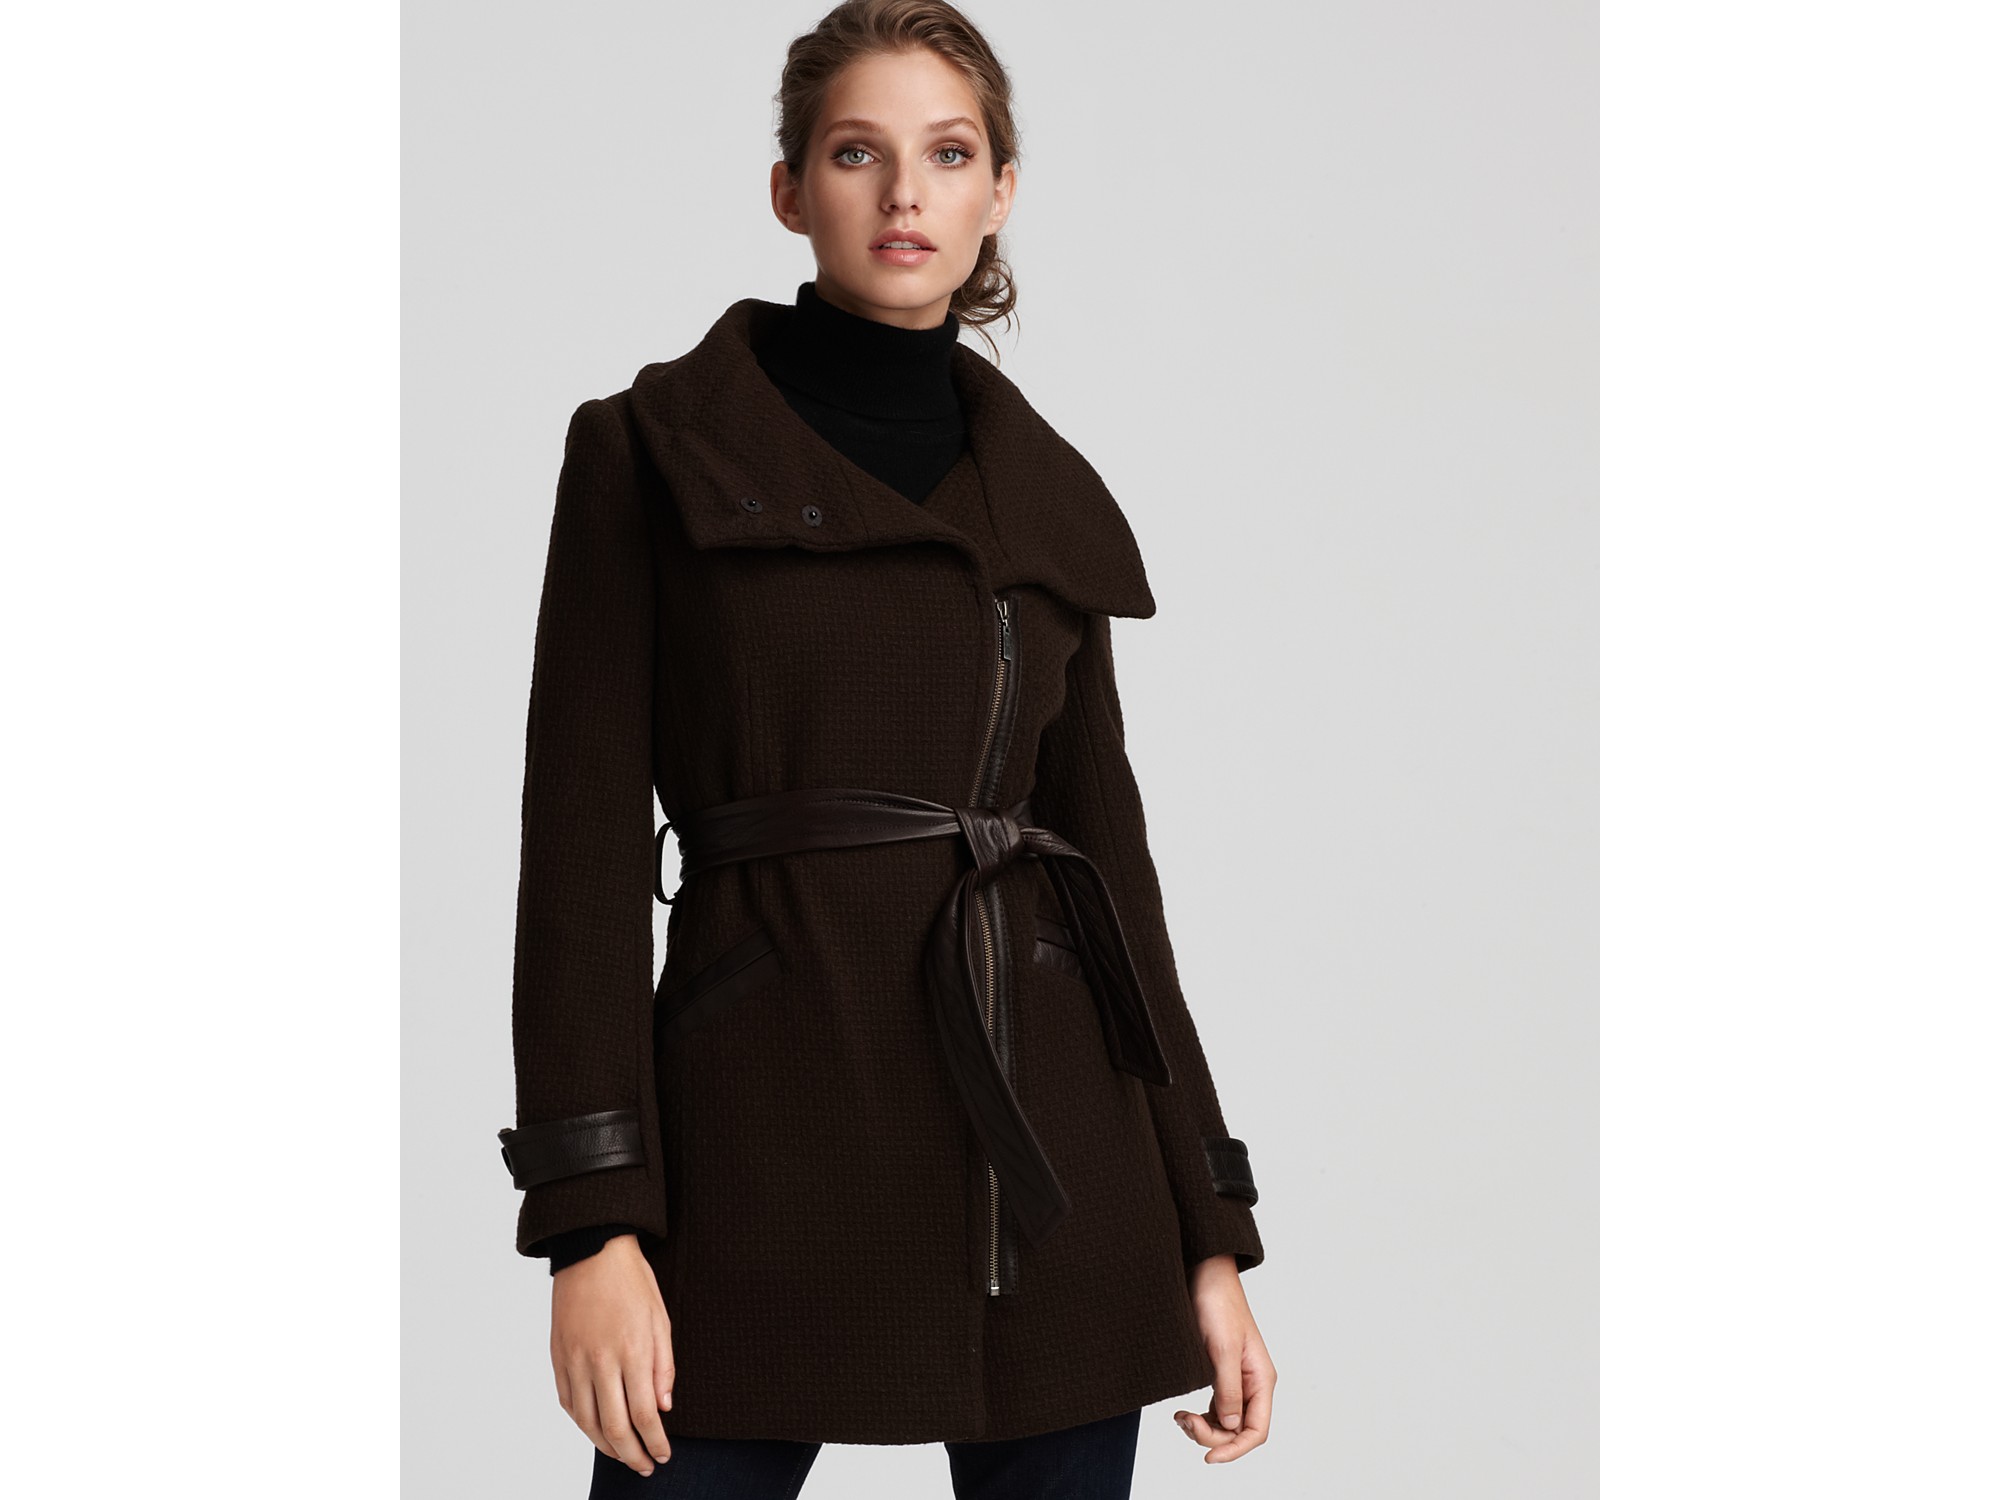 Lyst - Cole Haan Asymmetric Belted Coat with Leather Trim in Black